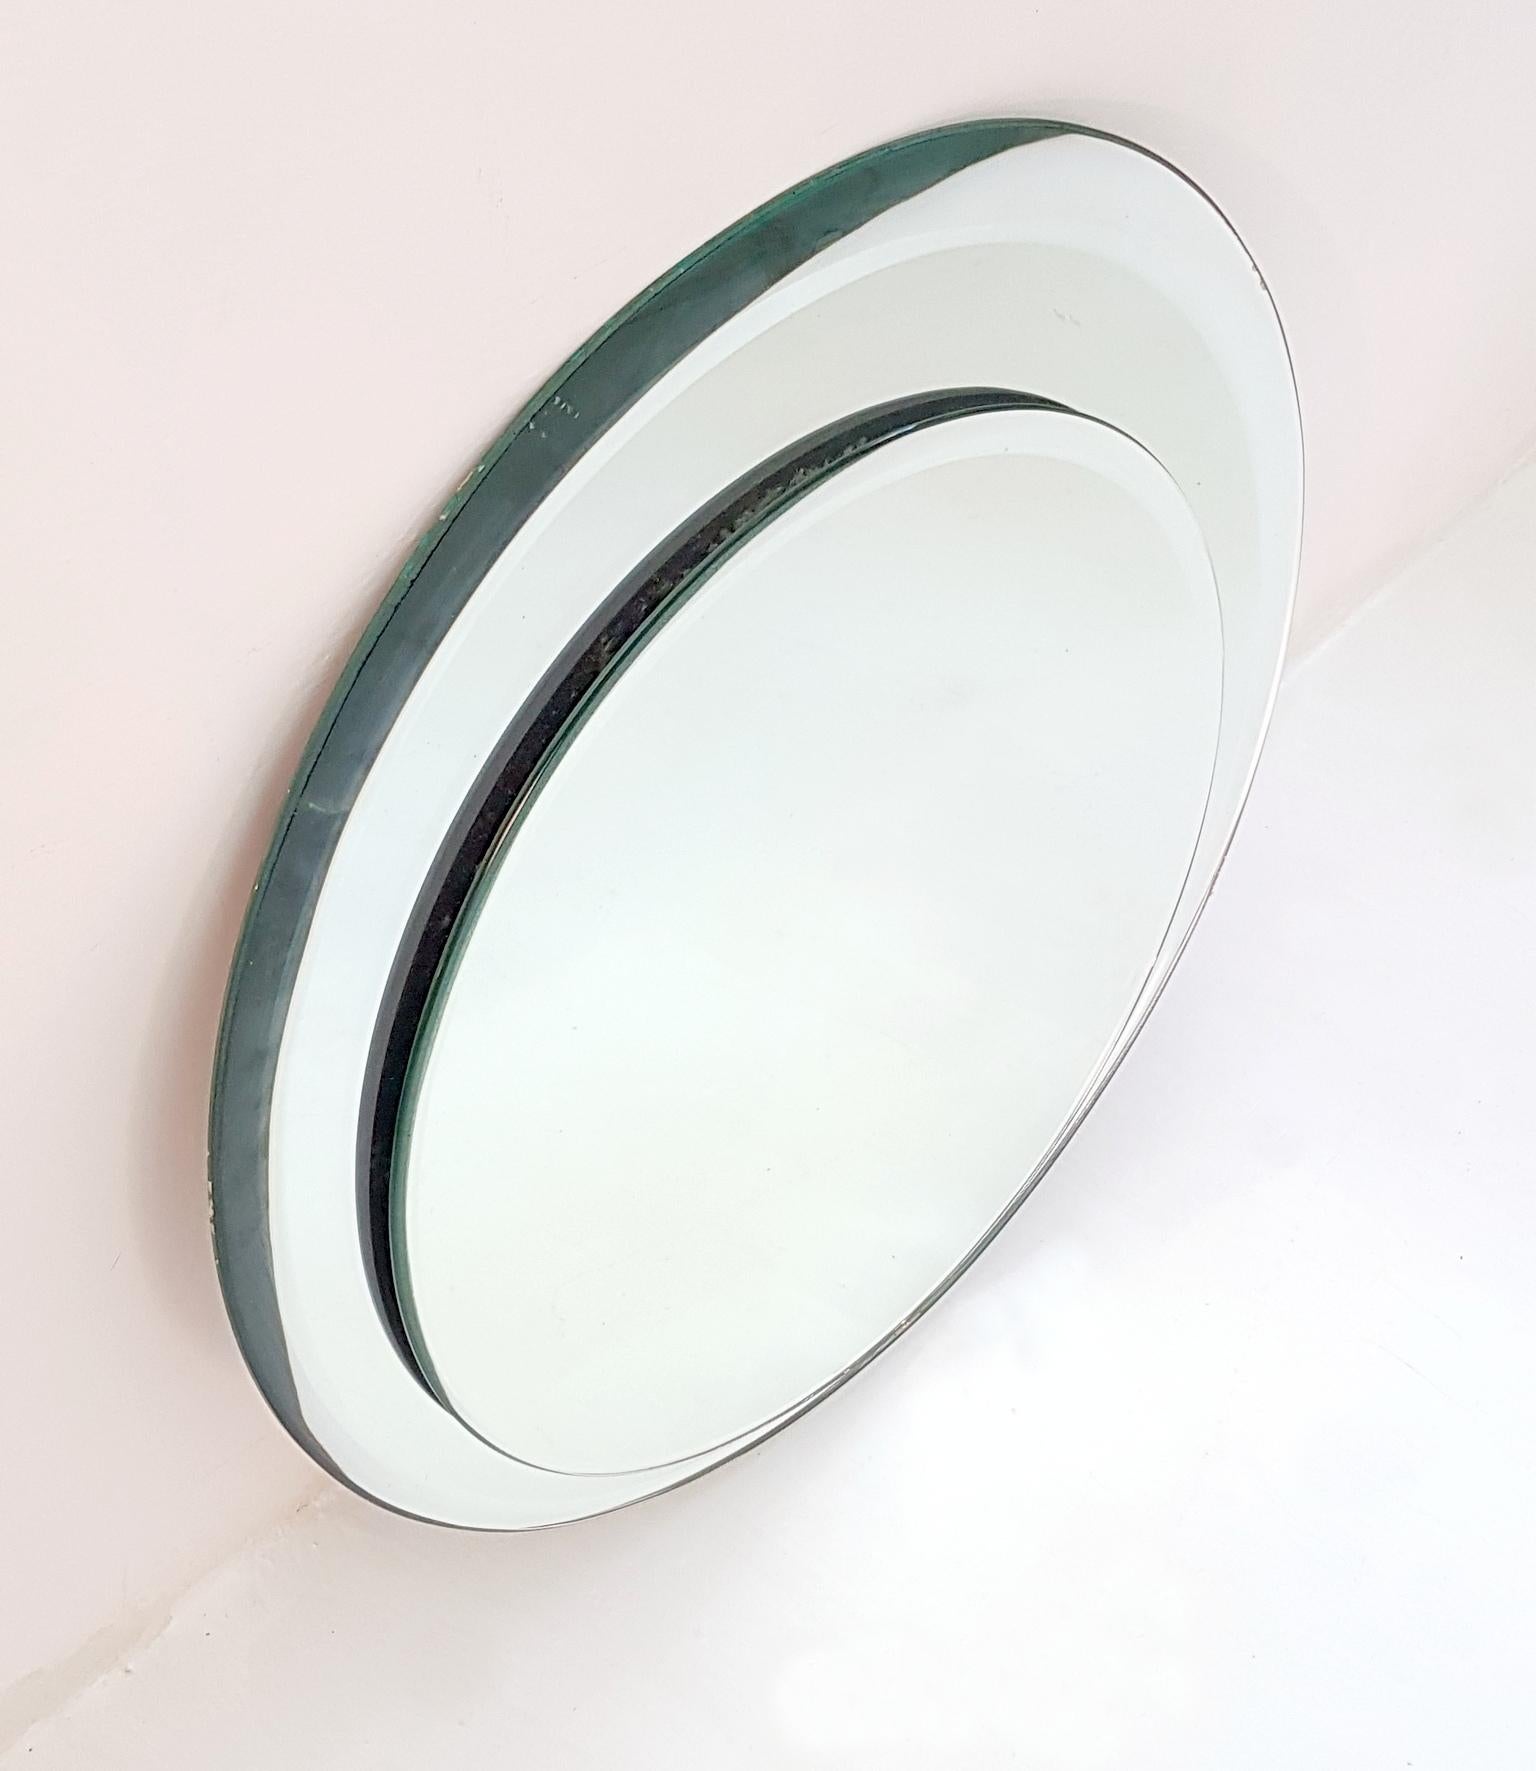 An Italian round vintage mirror with a double mirror glass circle design.